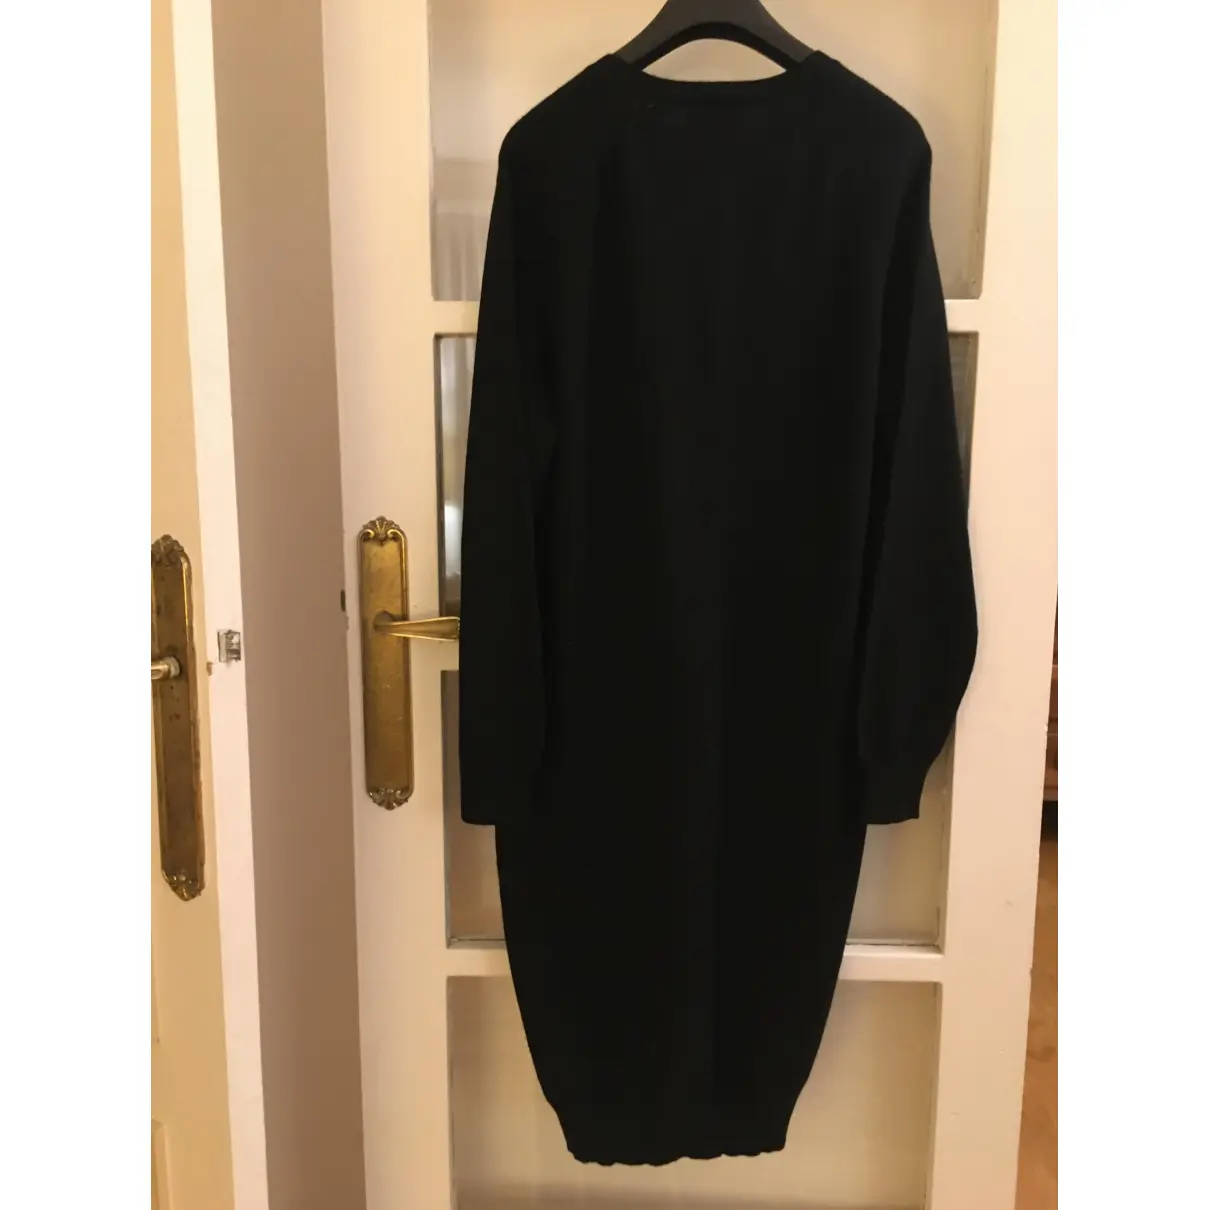 Buy Eric Bompard Cashmere mid-length dress online